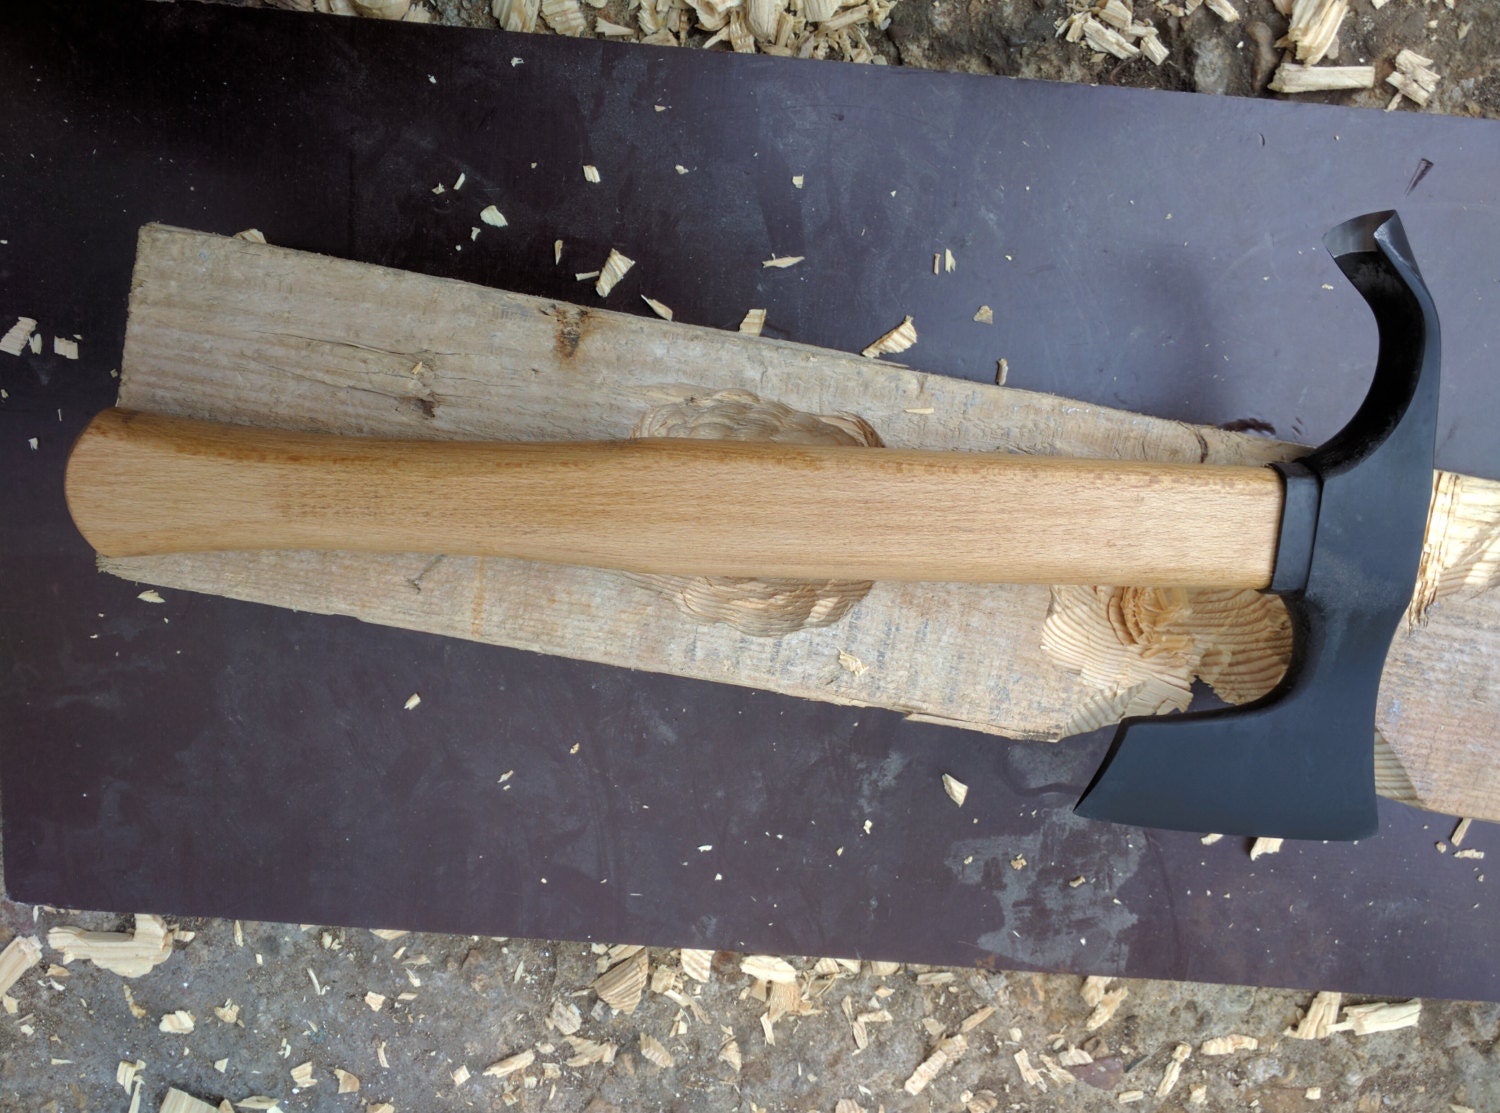 mapsyst Bearded Hatchet/Axe Combined with Curved Adze Blade - Bowl Makers Tool